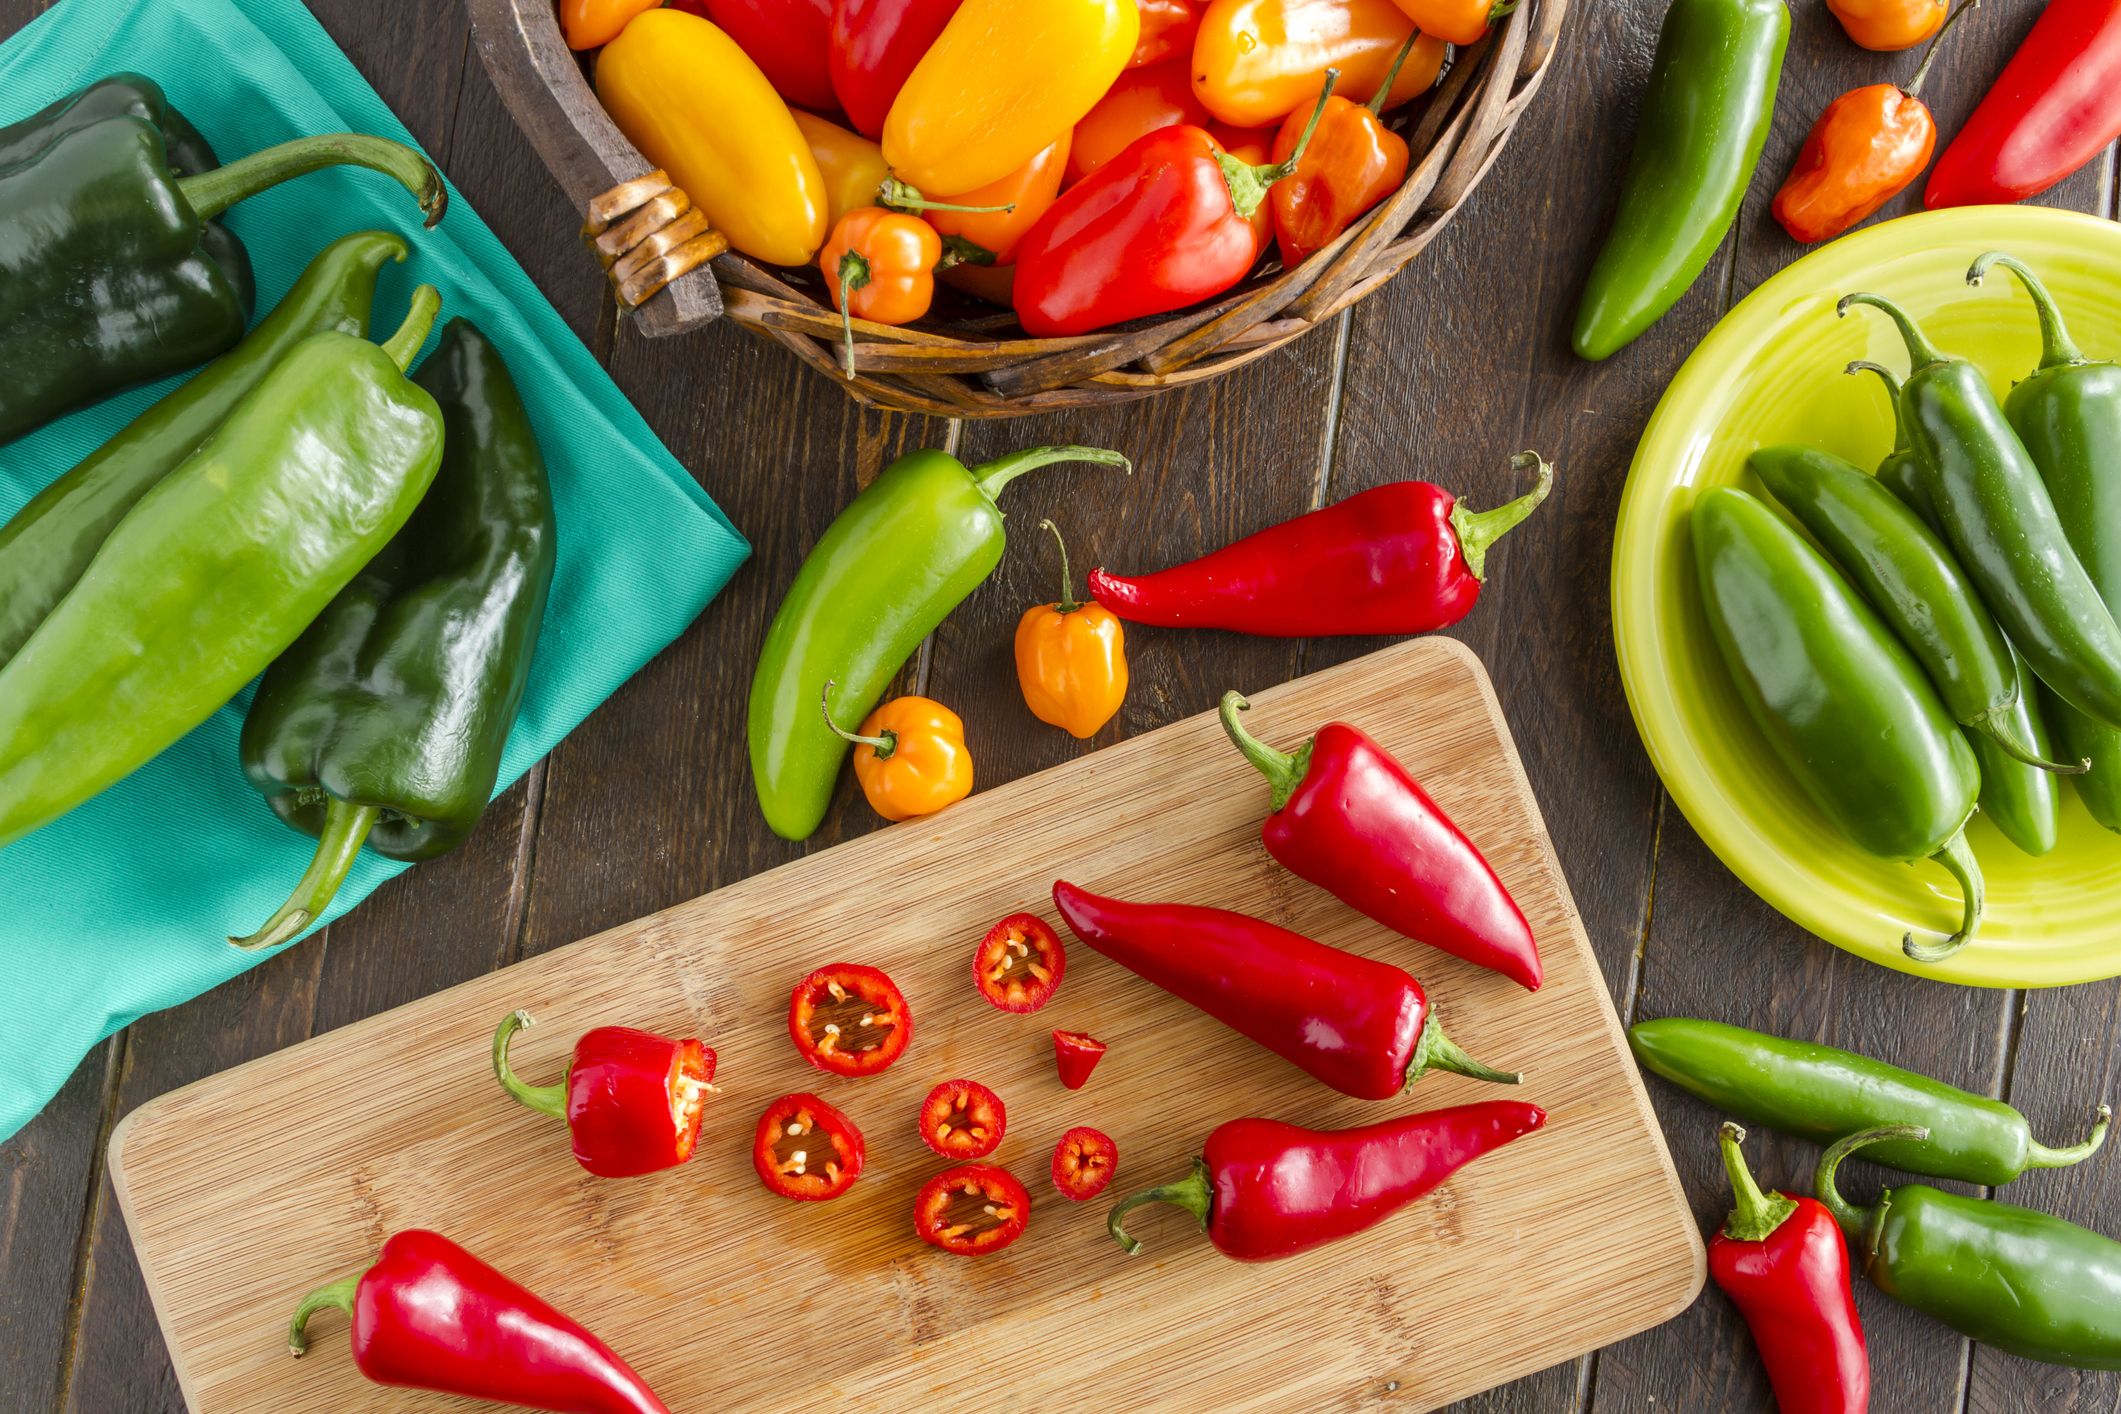 Types of Peppers - 10 Different Kinds of Peppers and Their Uses